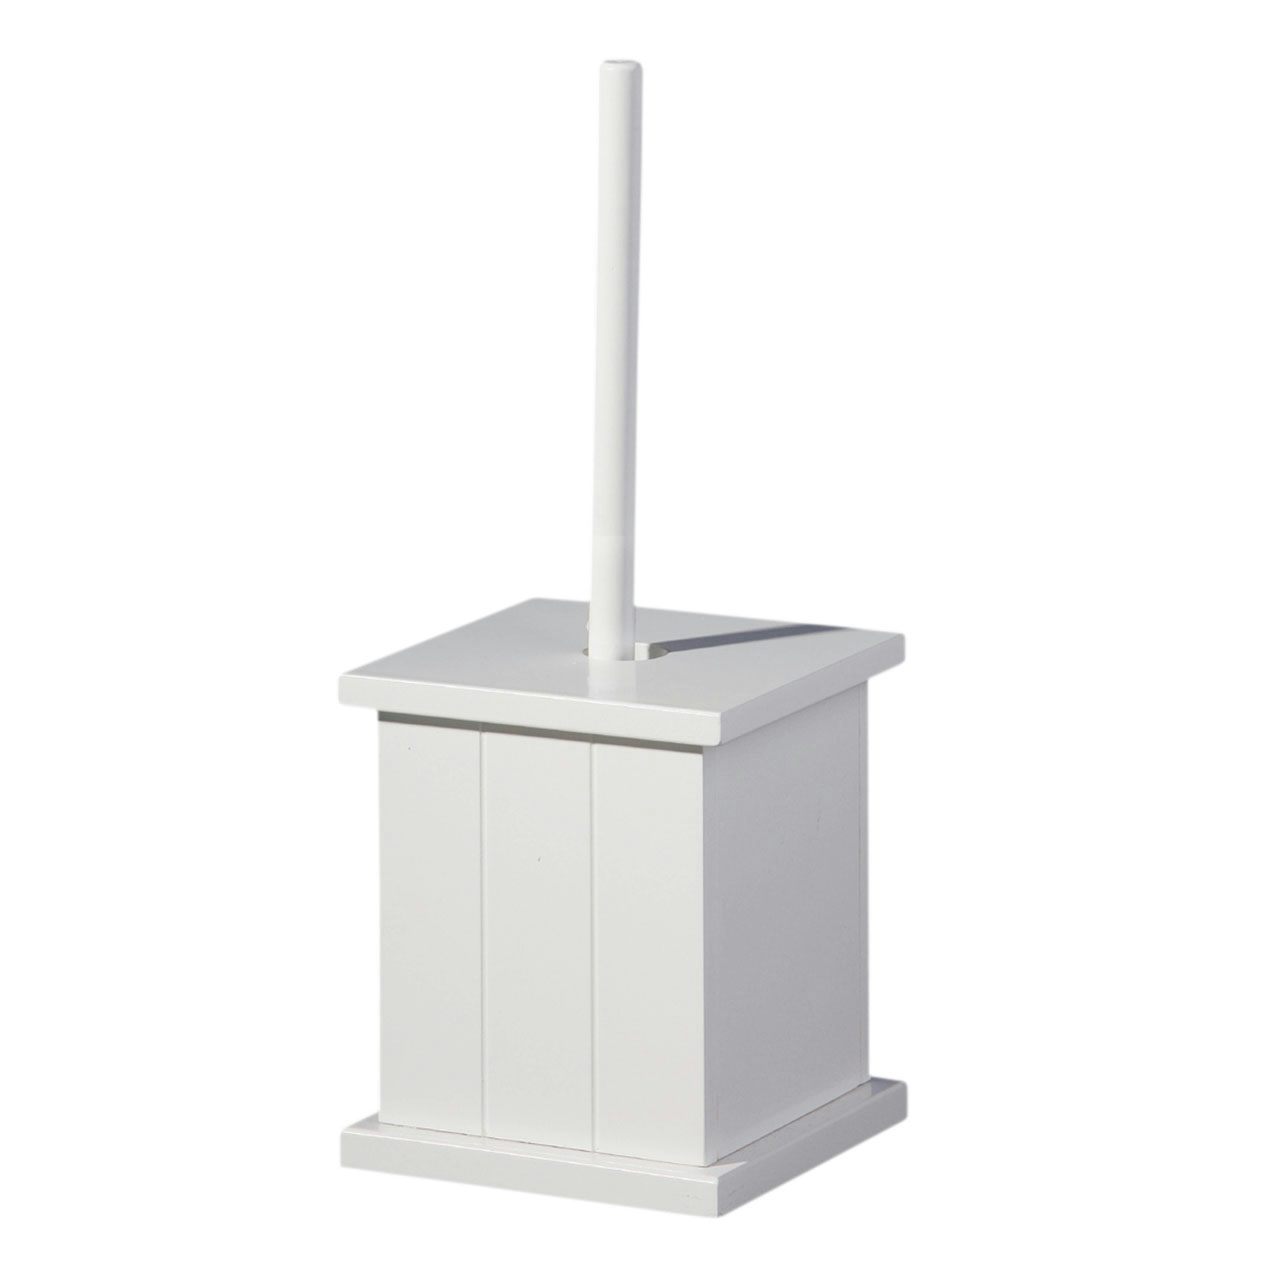 Accents Portland white wood toilet brush and holder